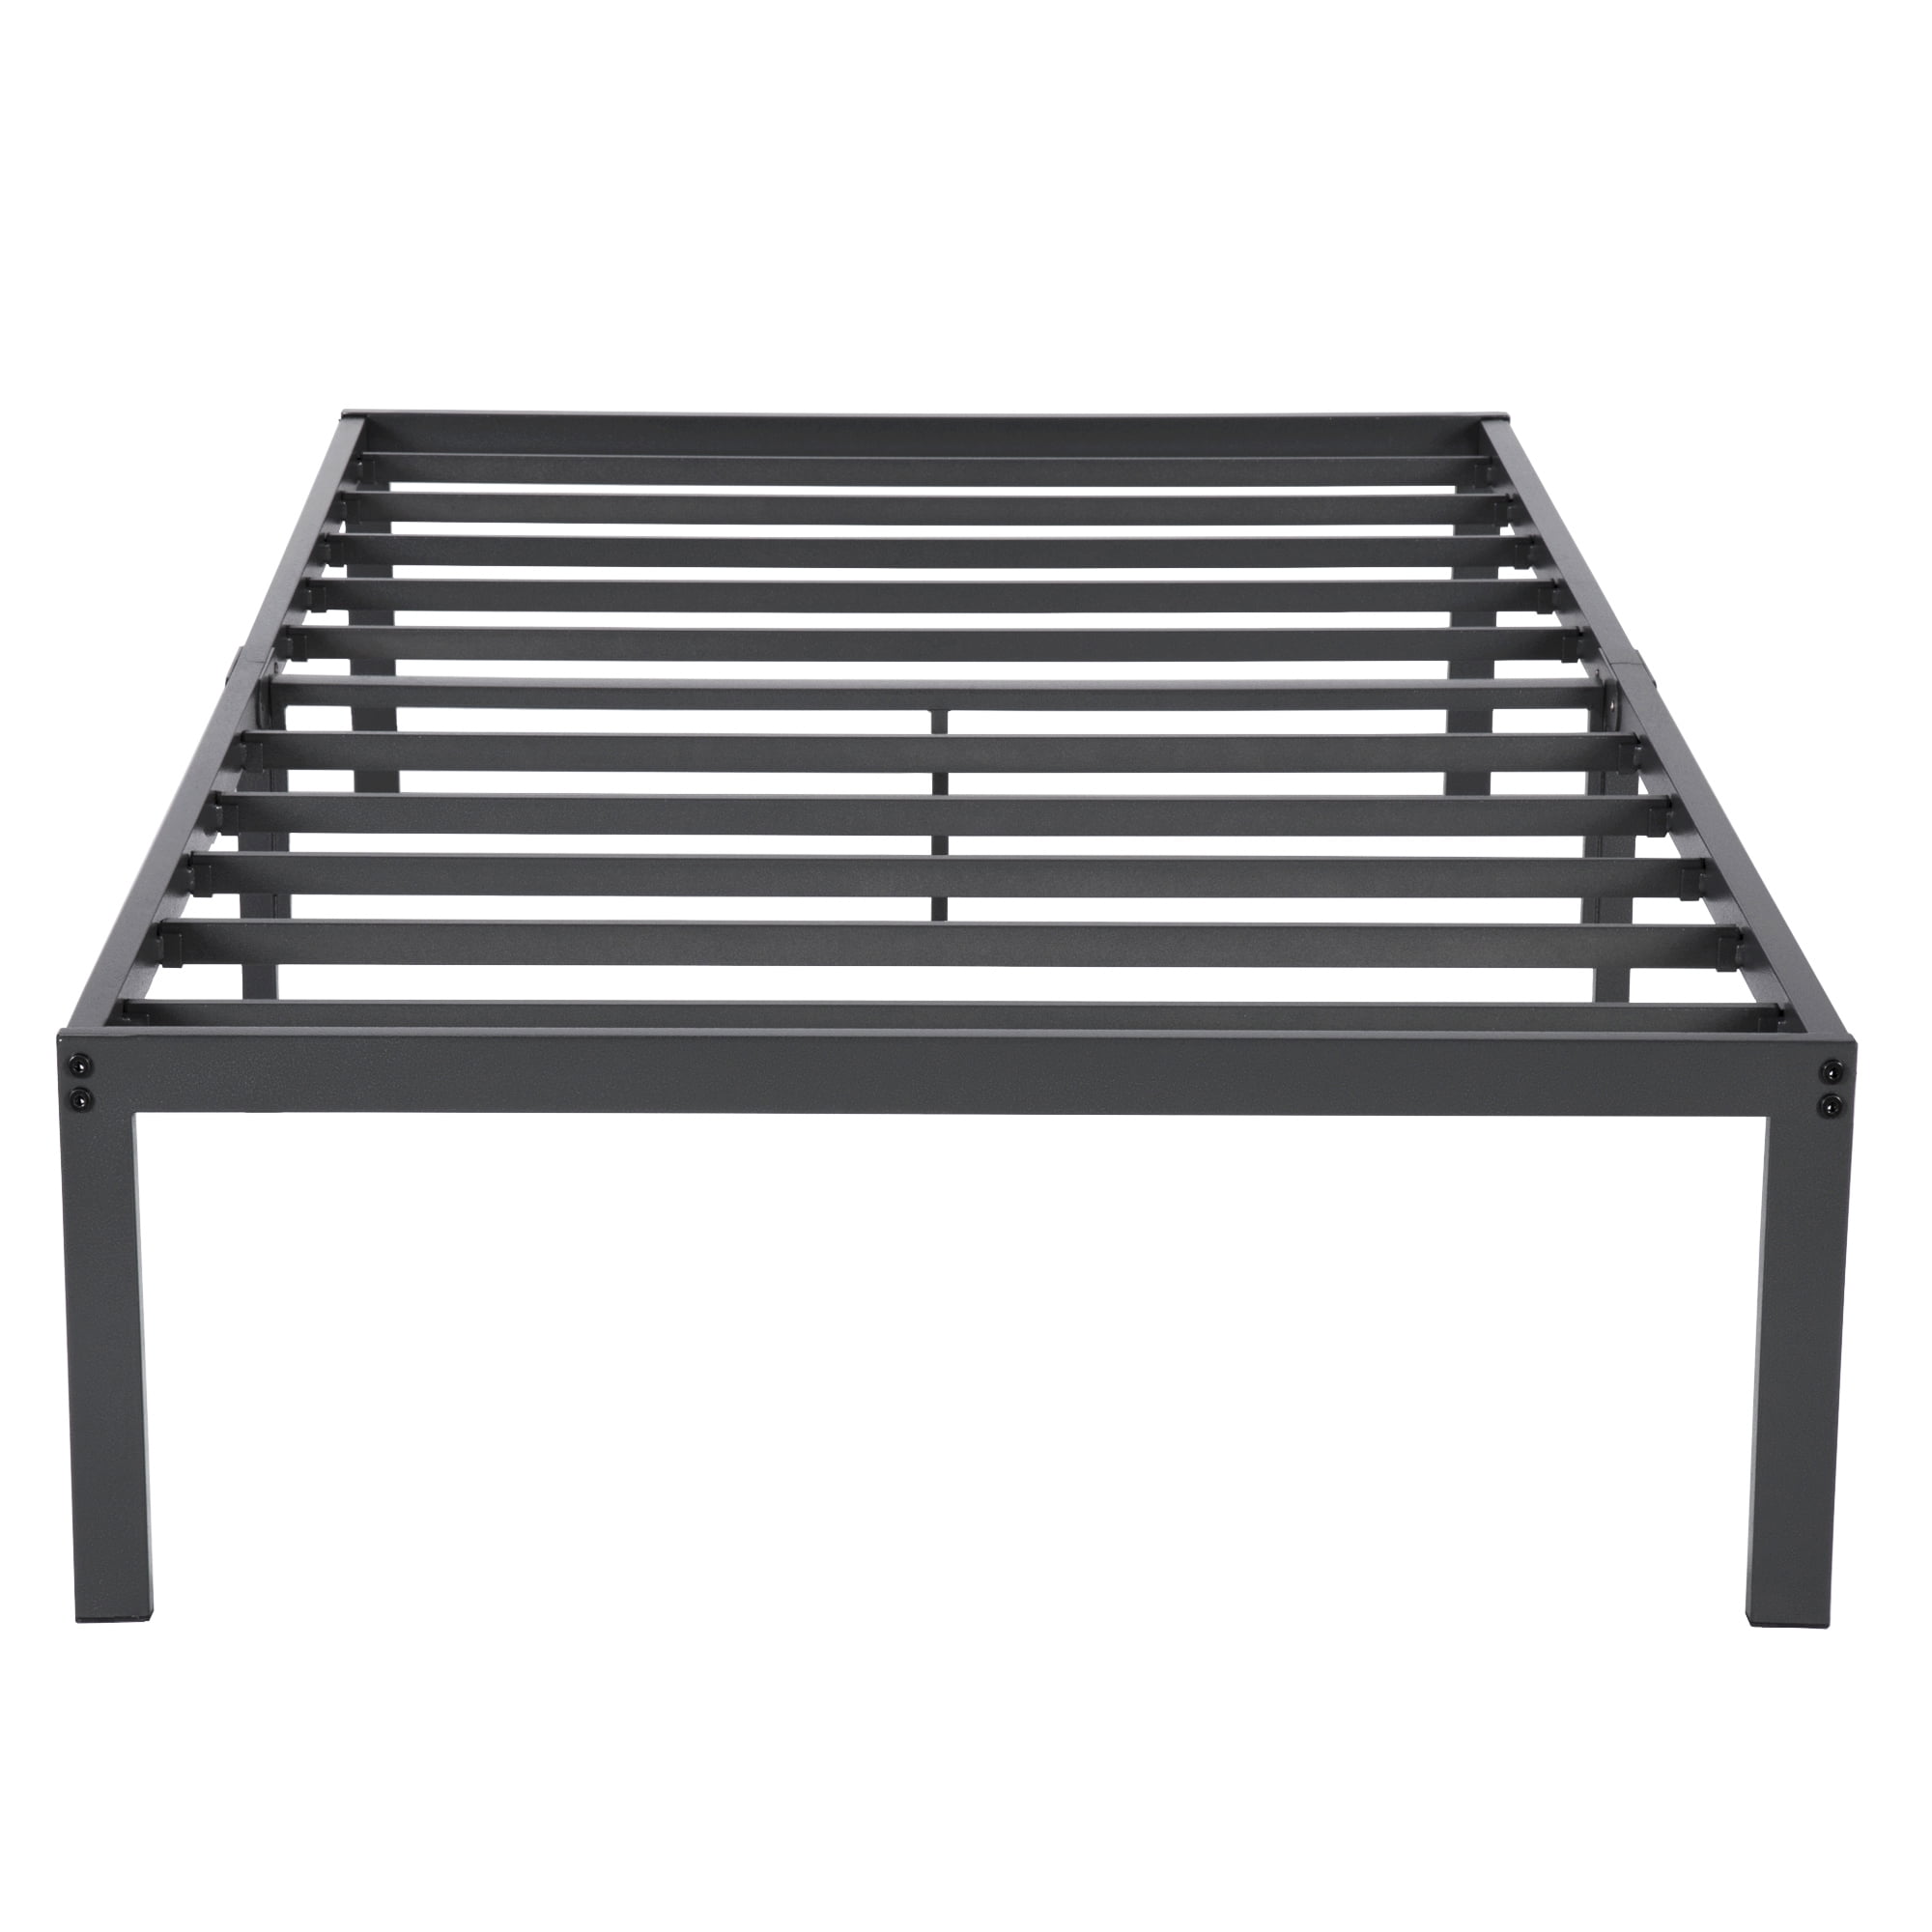 METAL PLATFORM BED FRAME Steel Slat Twin Full Queen King Size Bed 16 Inch Tall 